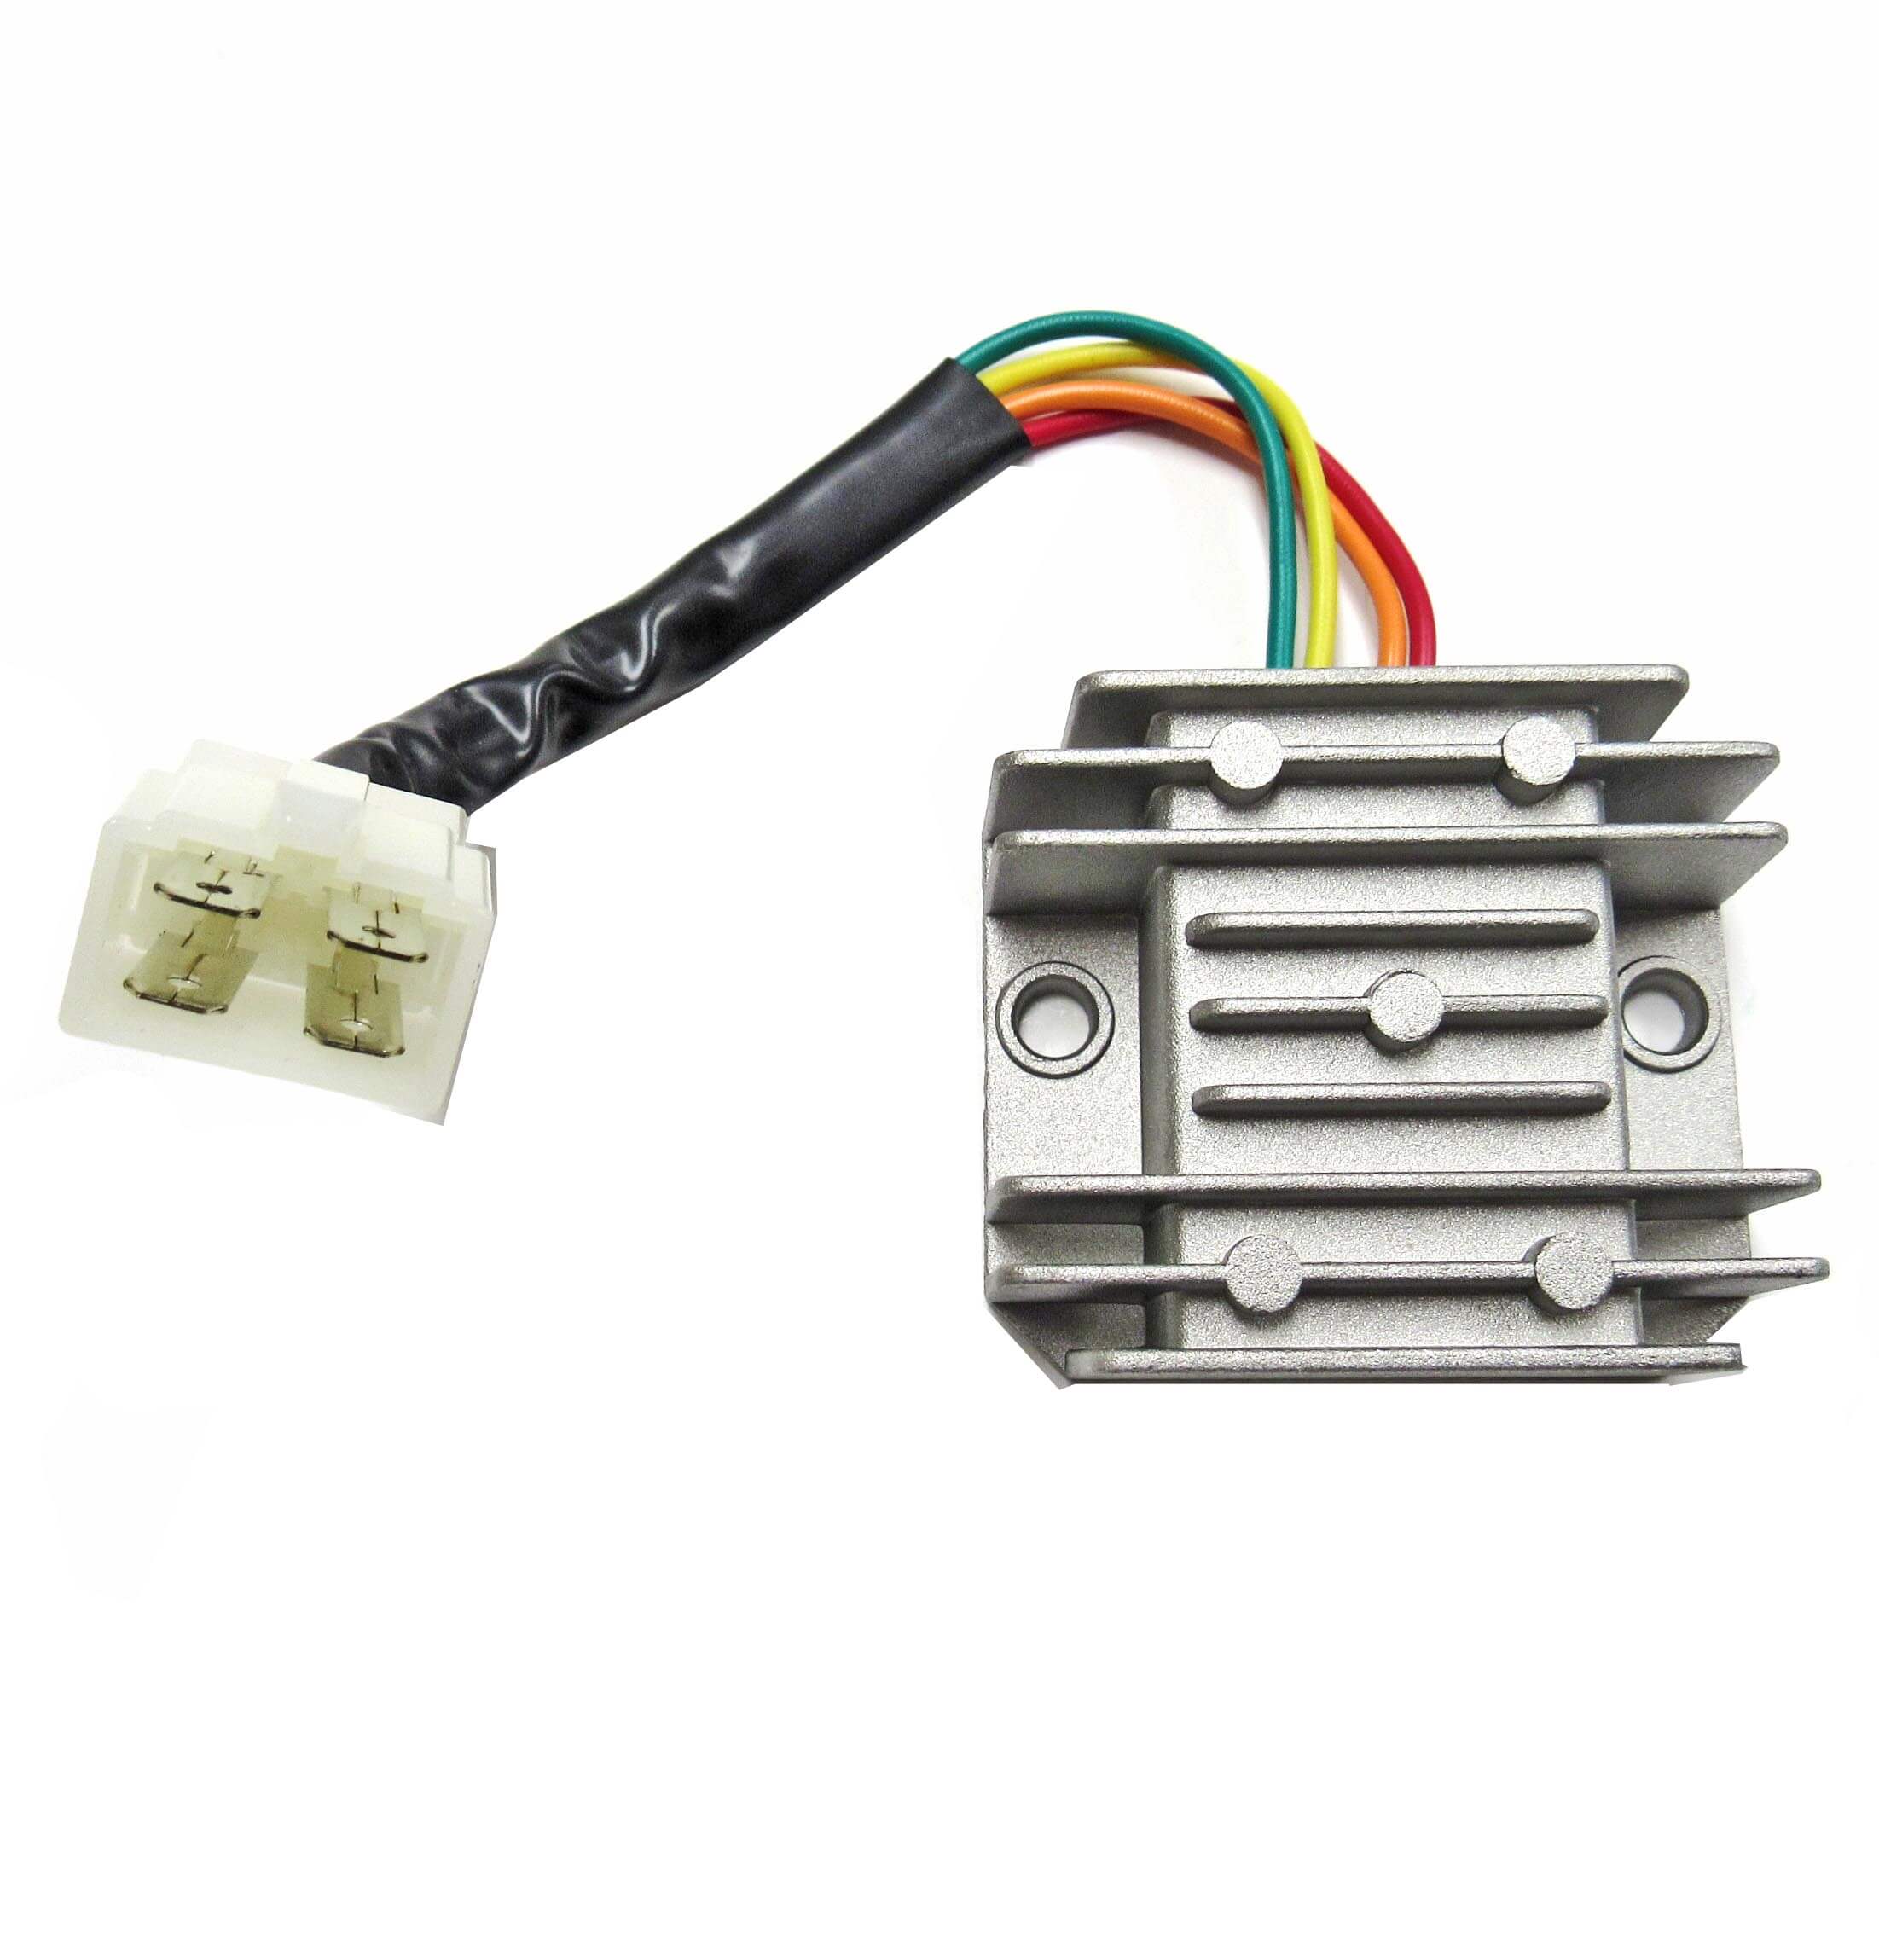 Voltage Regulator Rectifier CG Chinese ATV's, SCOOTERs 4 Pins in 4 Pin FM Jack 58x68 Bolts Ctr to Ctr 55mm